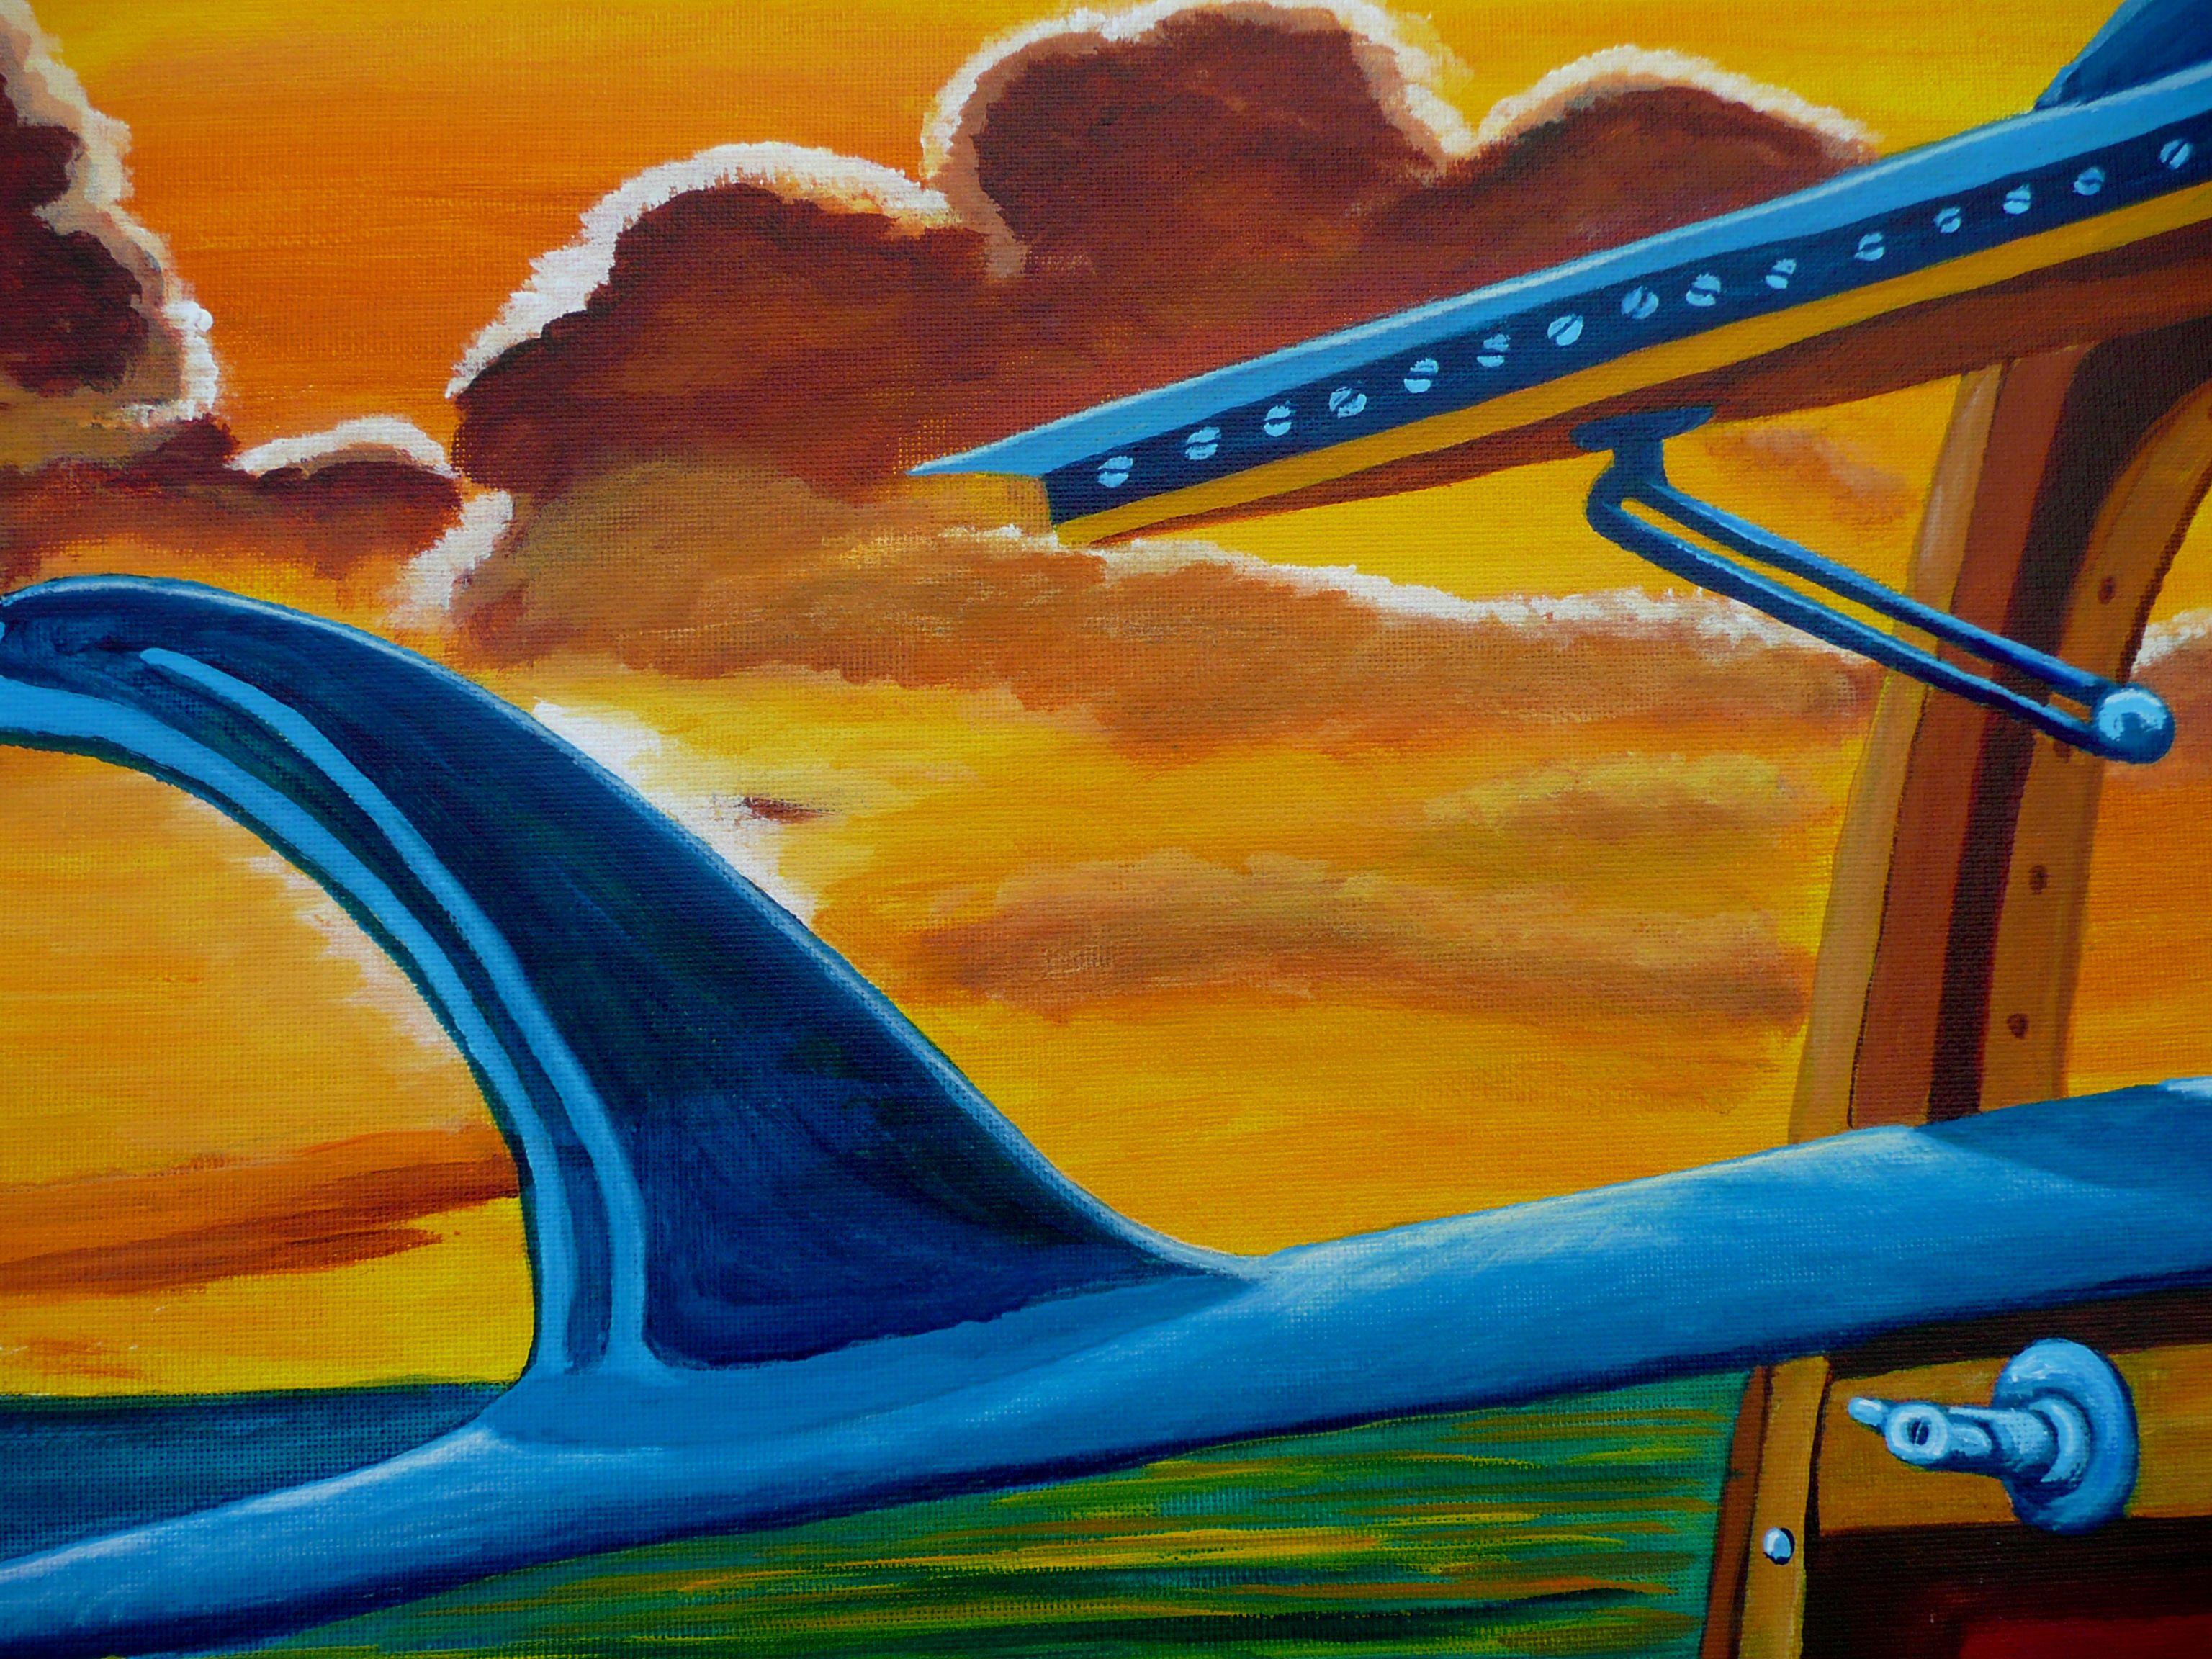 As the sun rises in the golden California sky a surfer is arriving with a board hanging out the back window of a classic Town and Country wagon known as a Woody.  This painting has been created using professional grade acrylics on flat canvas and